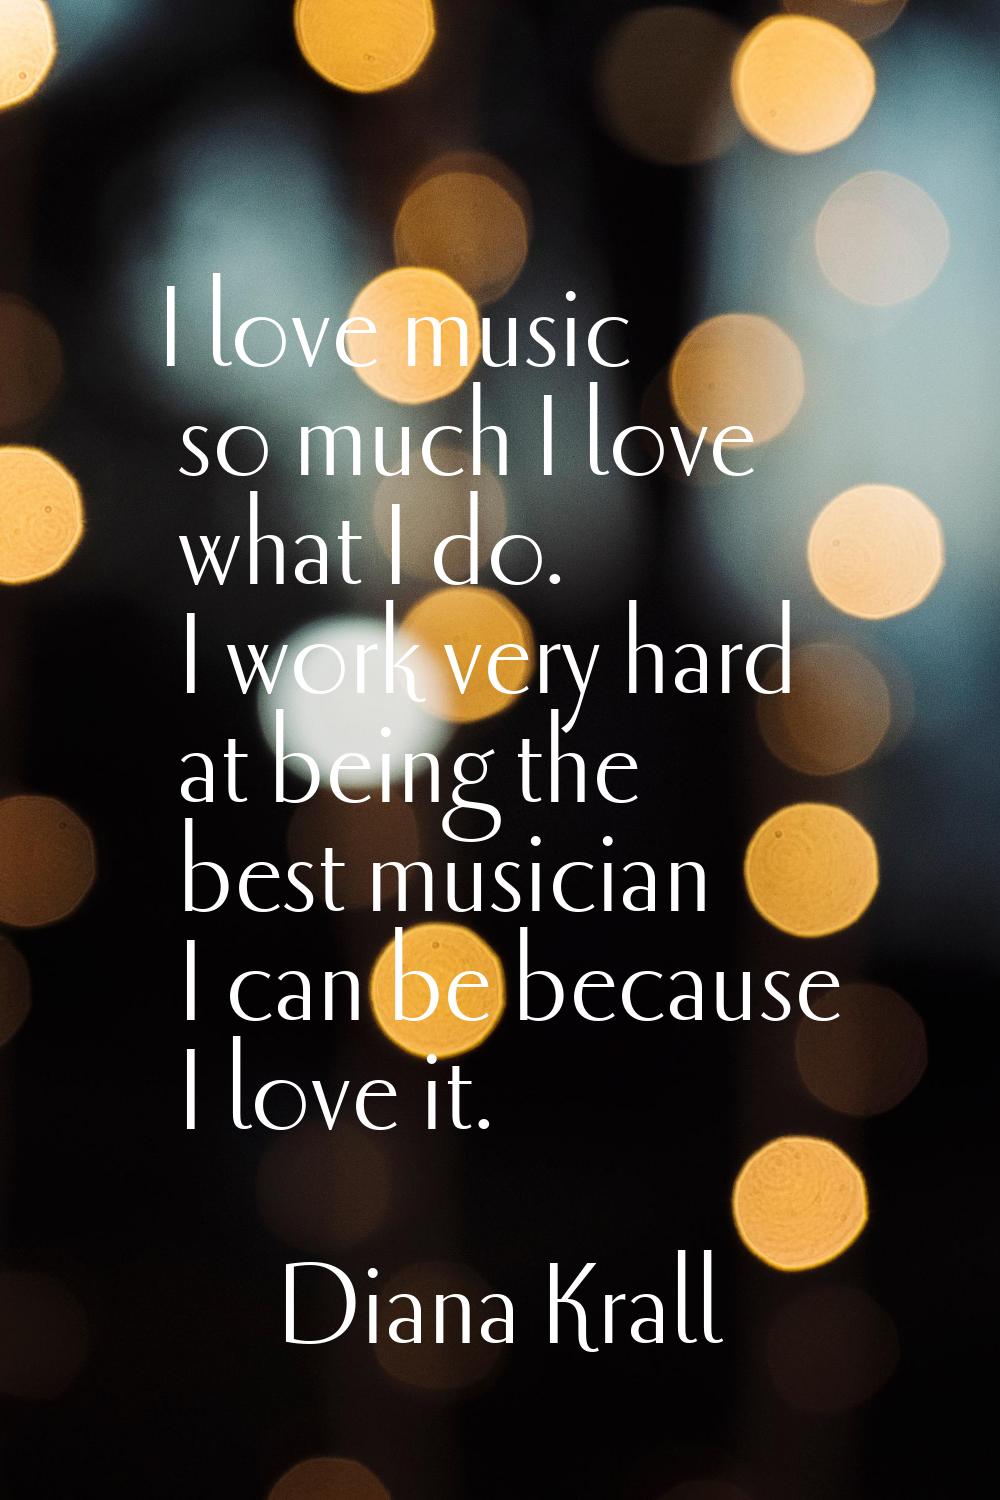 I love music so much I love what I do. I work very hard at being the best musician I can be because